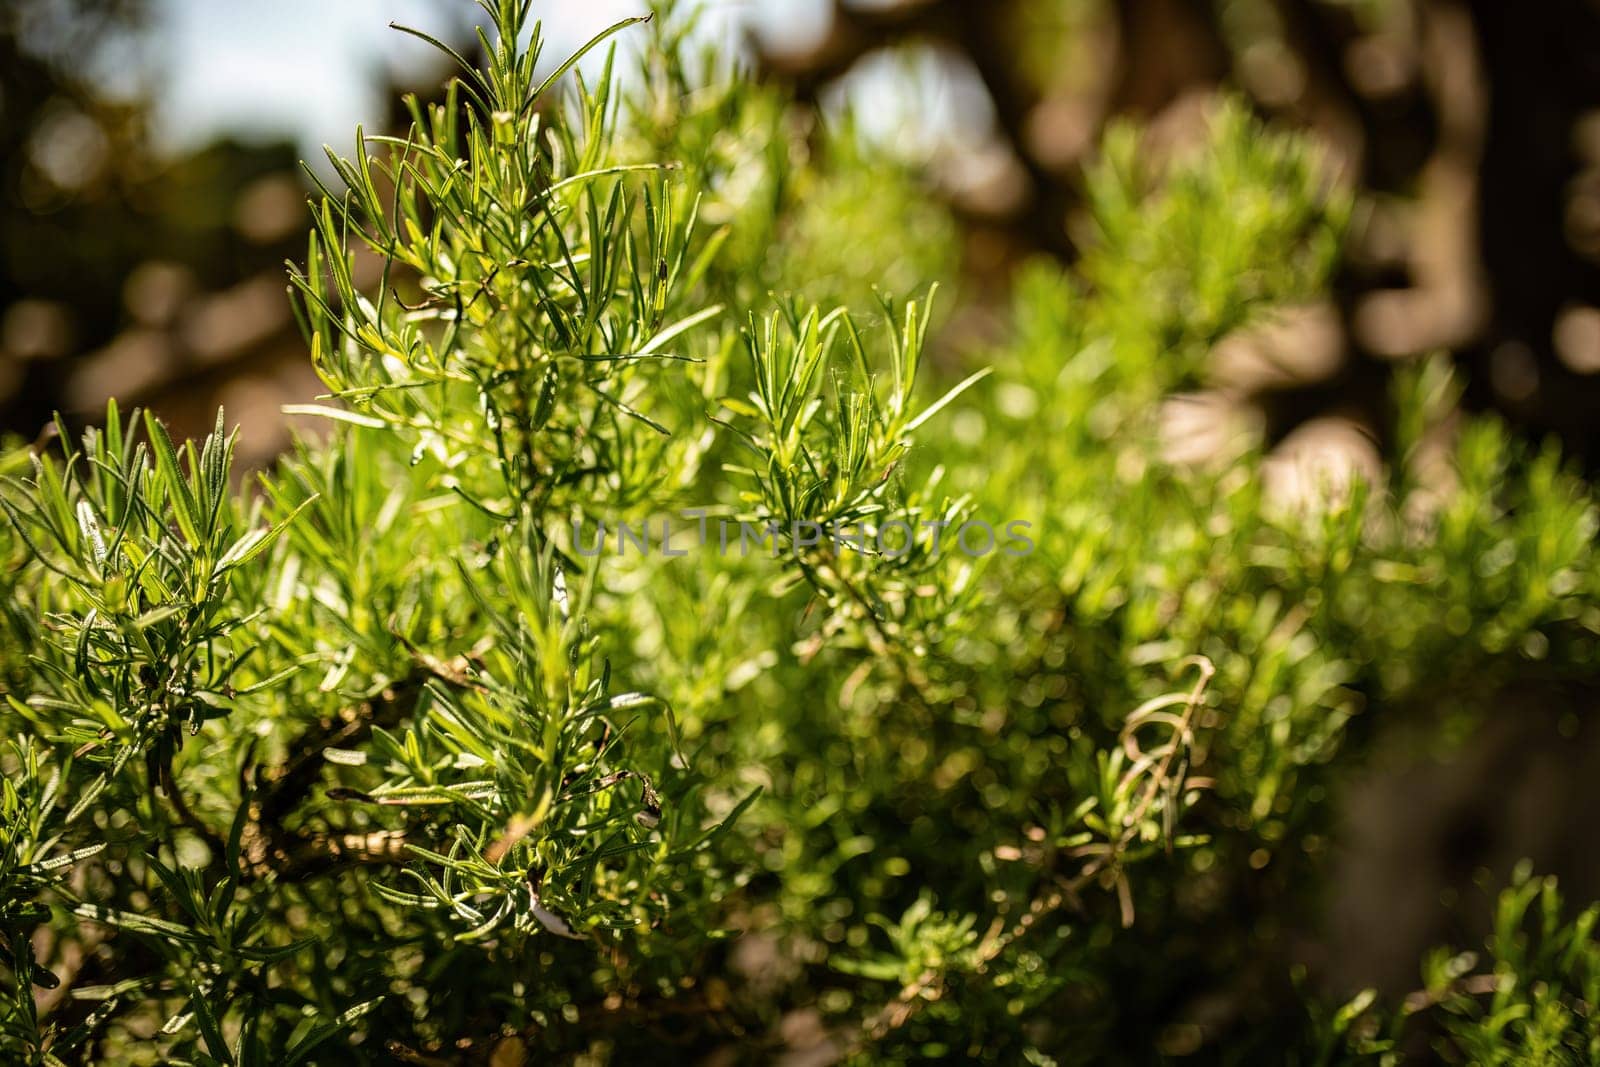 Rosemary Leaves in Nature by pippocarlot